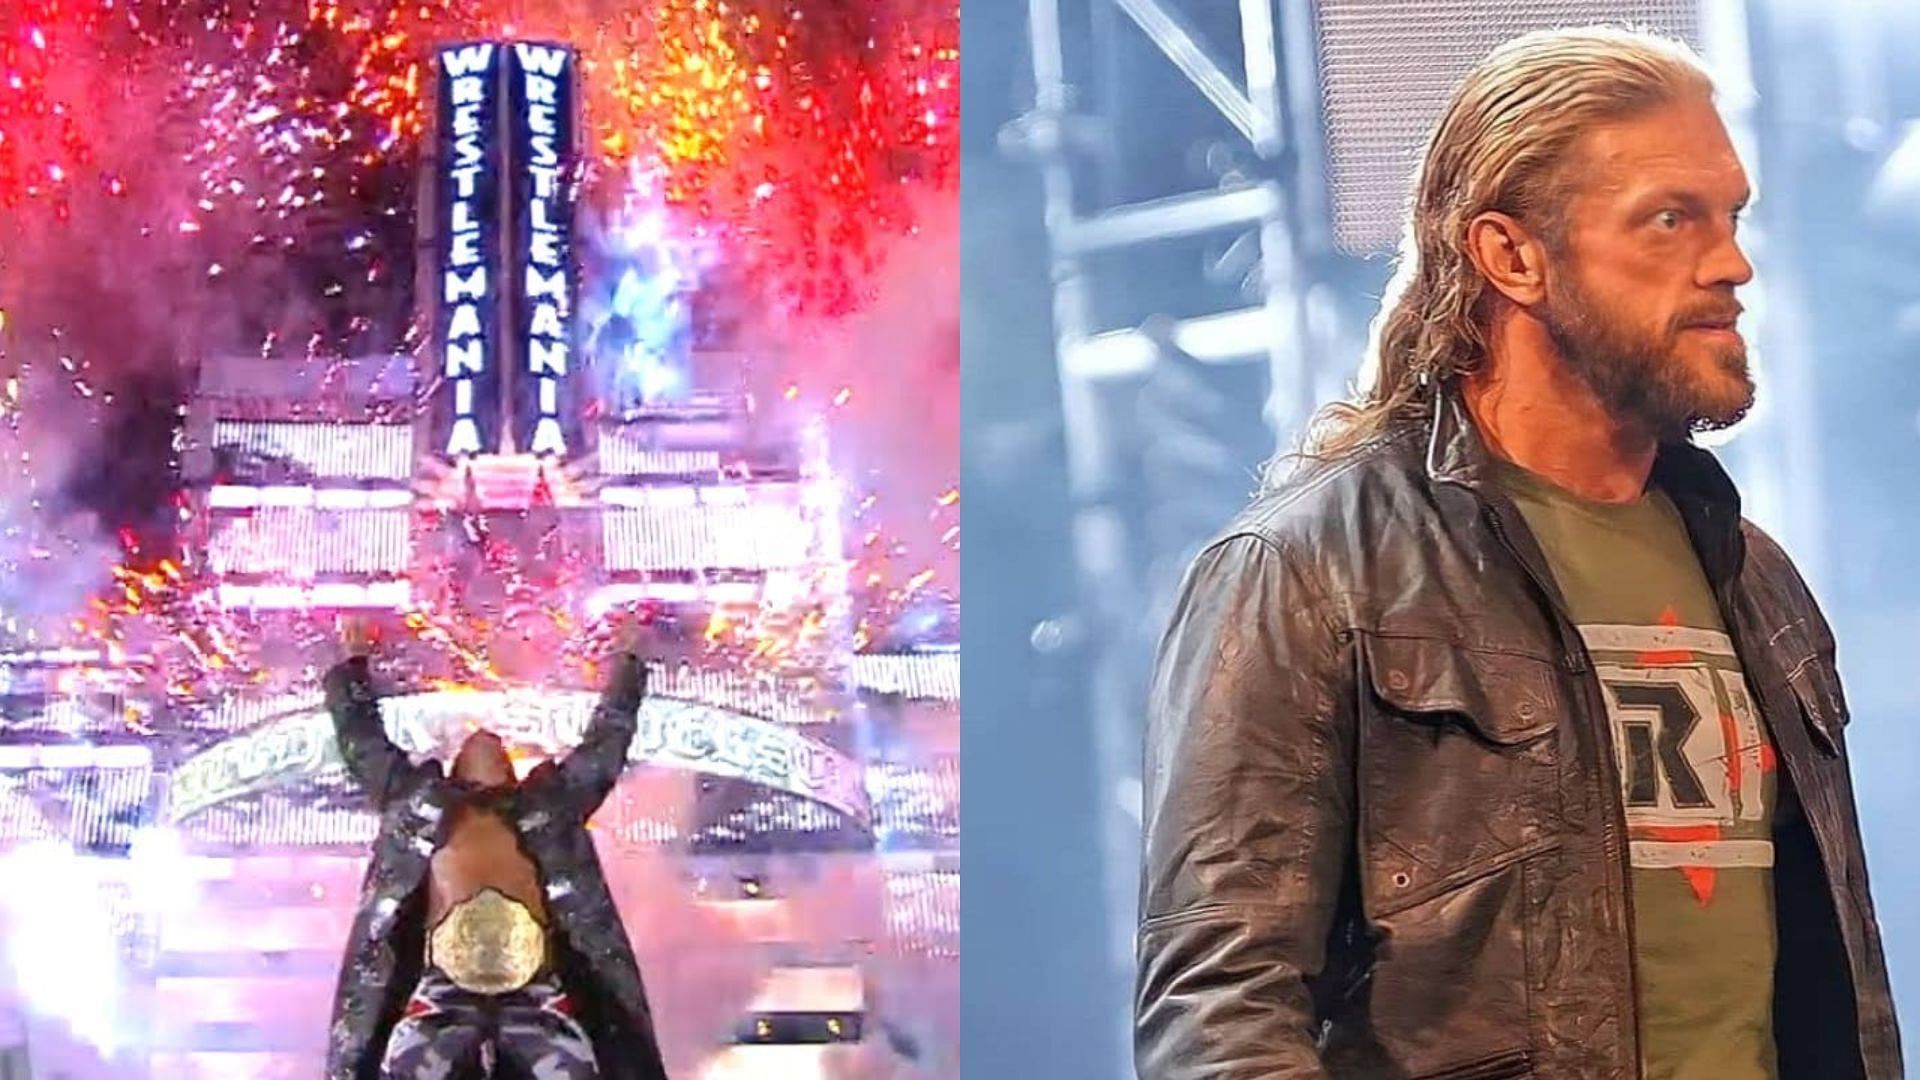 Edge celebrate his 25th year WWE anniversary on Smackdown